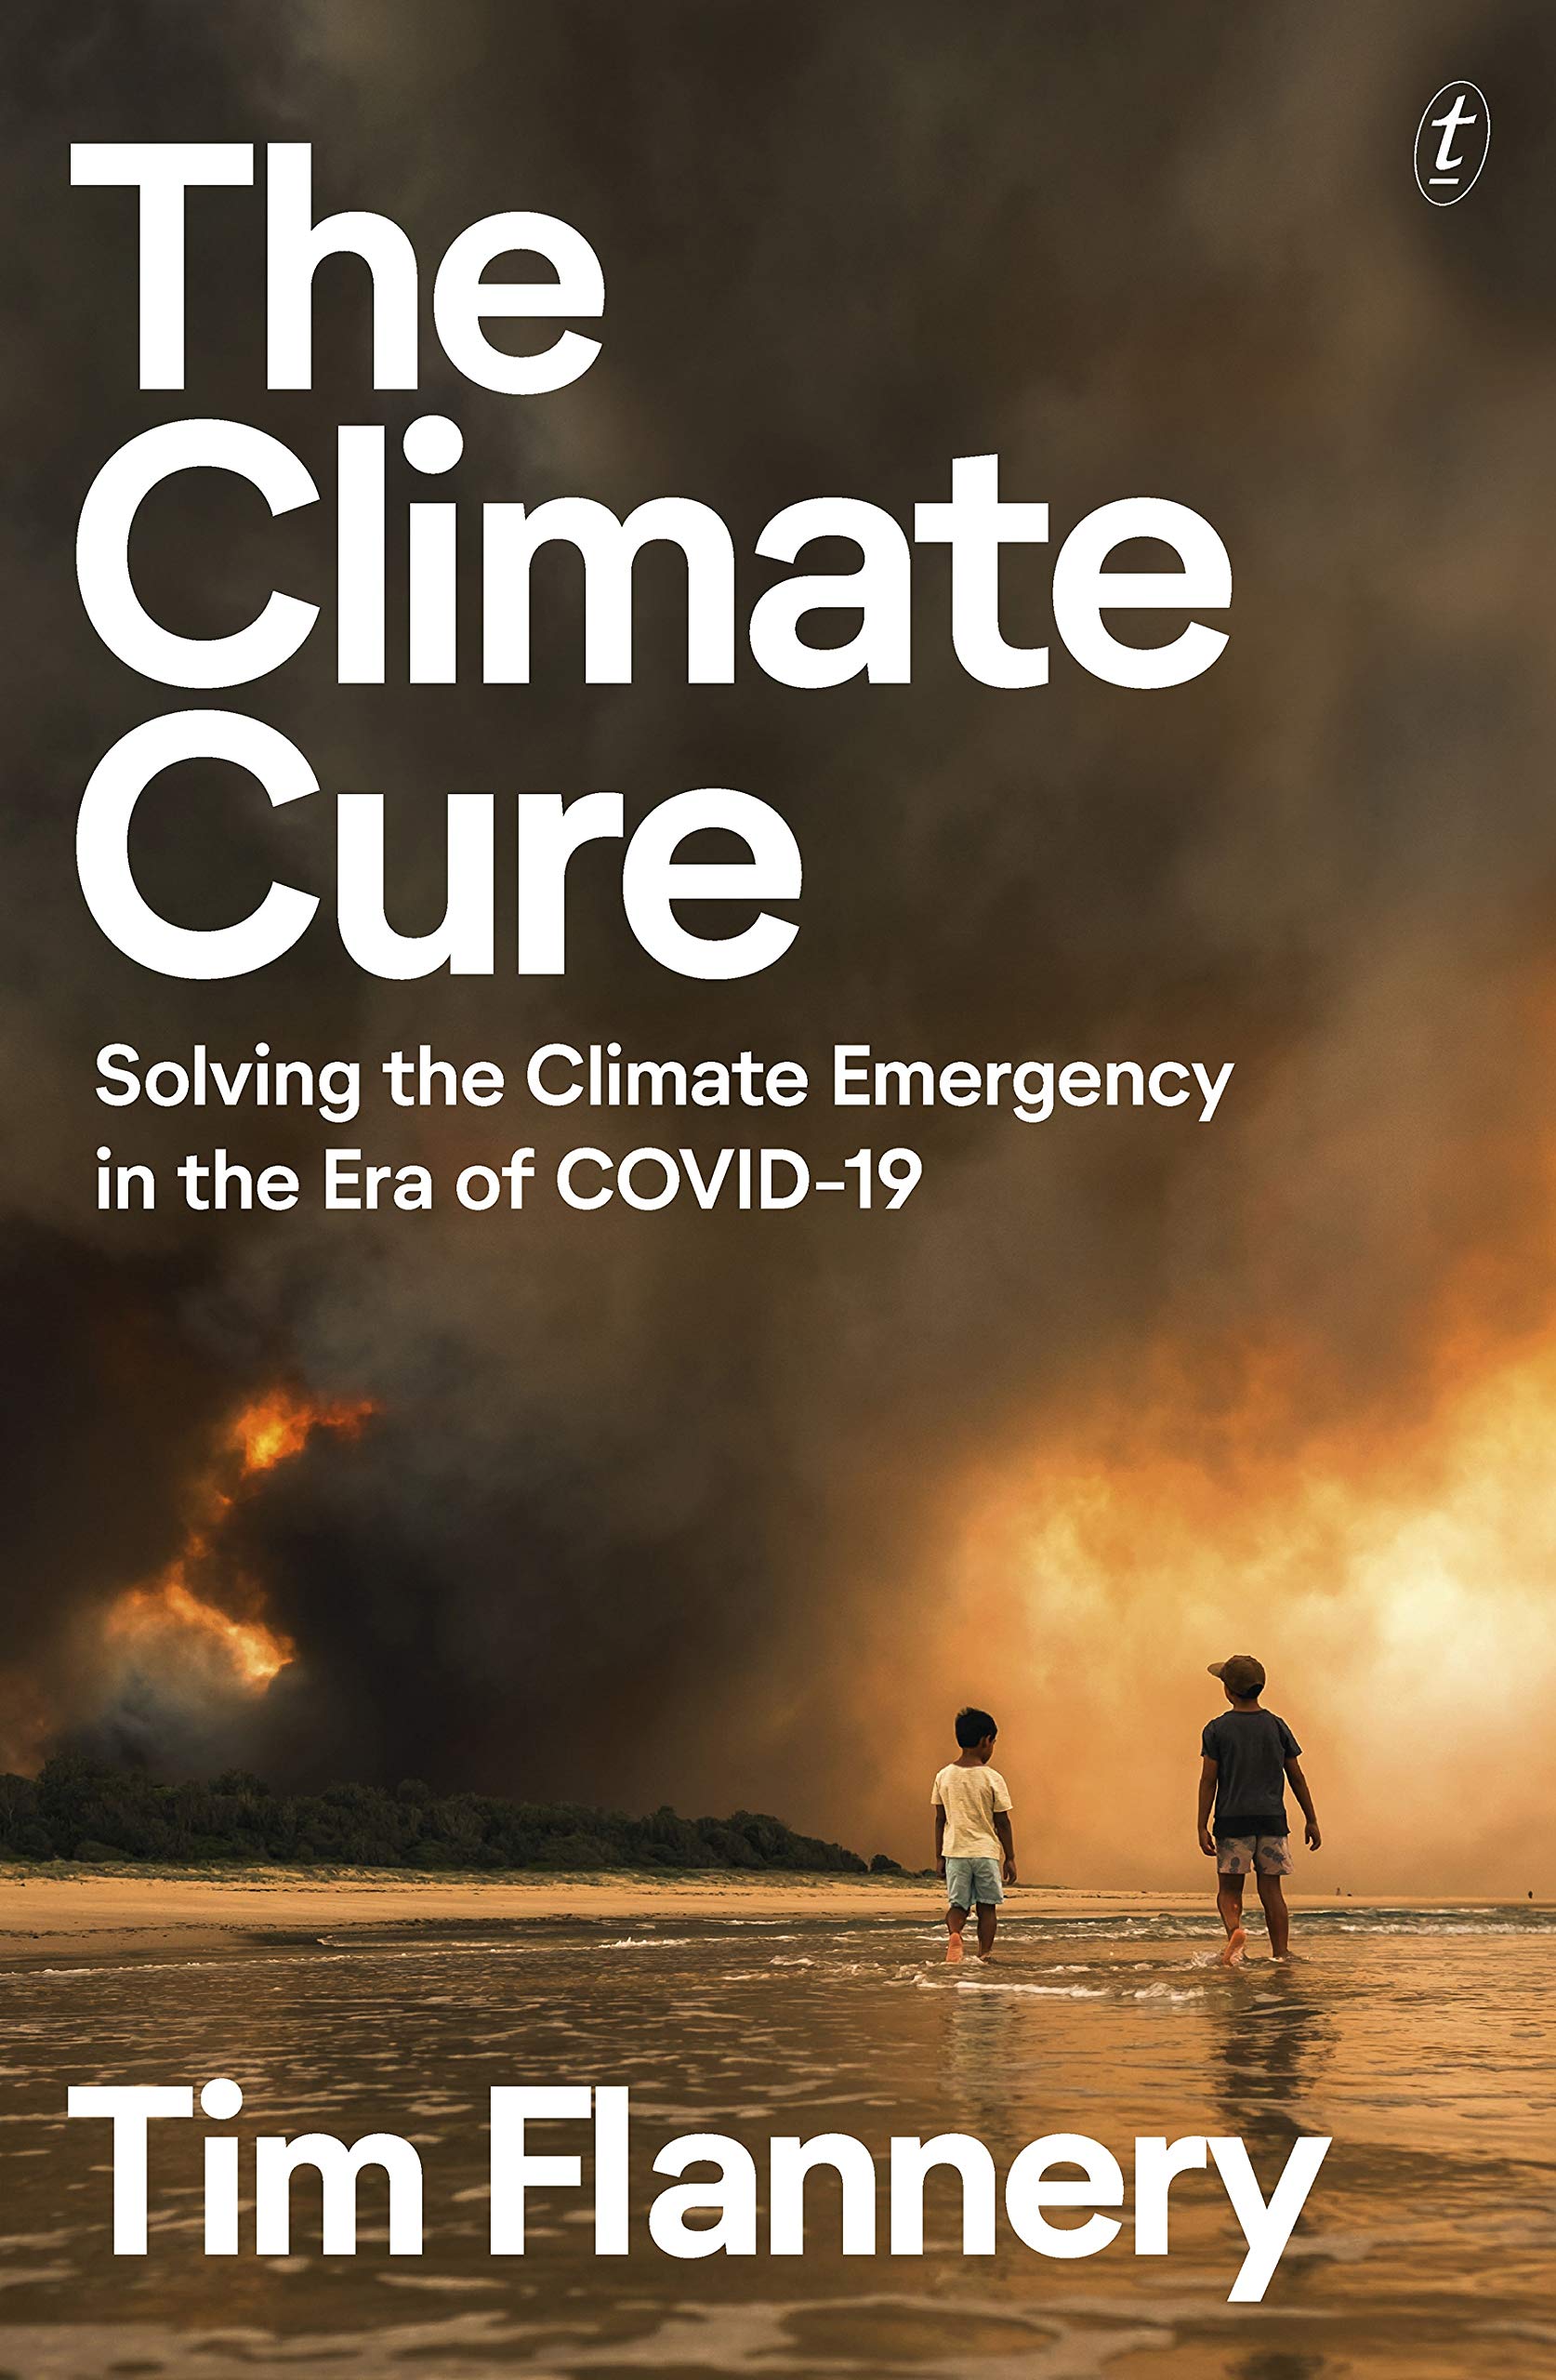 The Climate Cure: Solving the Climate Emergency in the Era of COVID-19, by Tim Flannery - Survival (and Other) Books About the COVID-19 Coronavirus - Survival Books - Survival, Sustainable Living